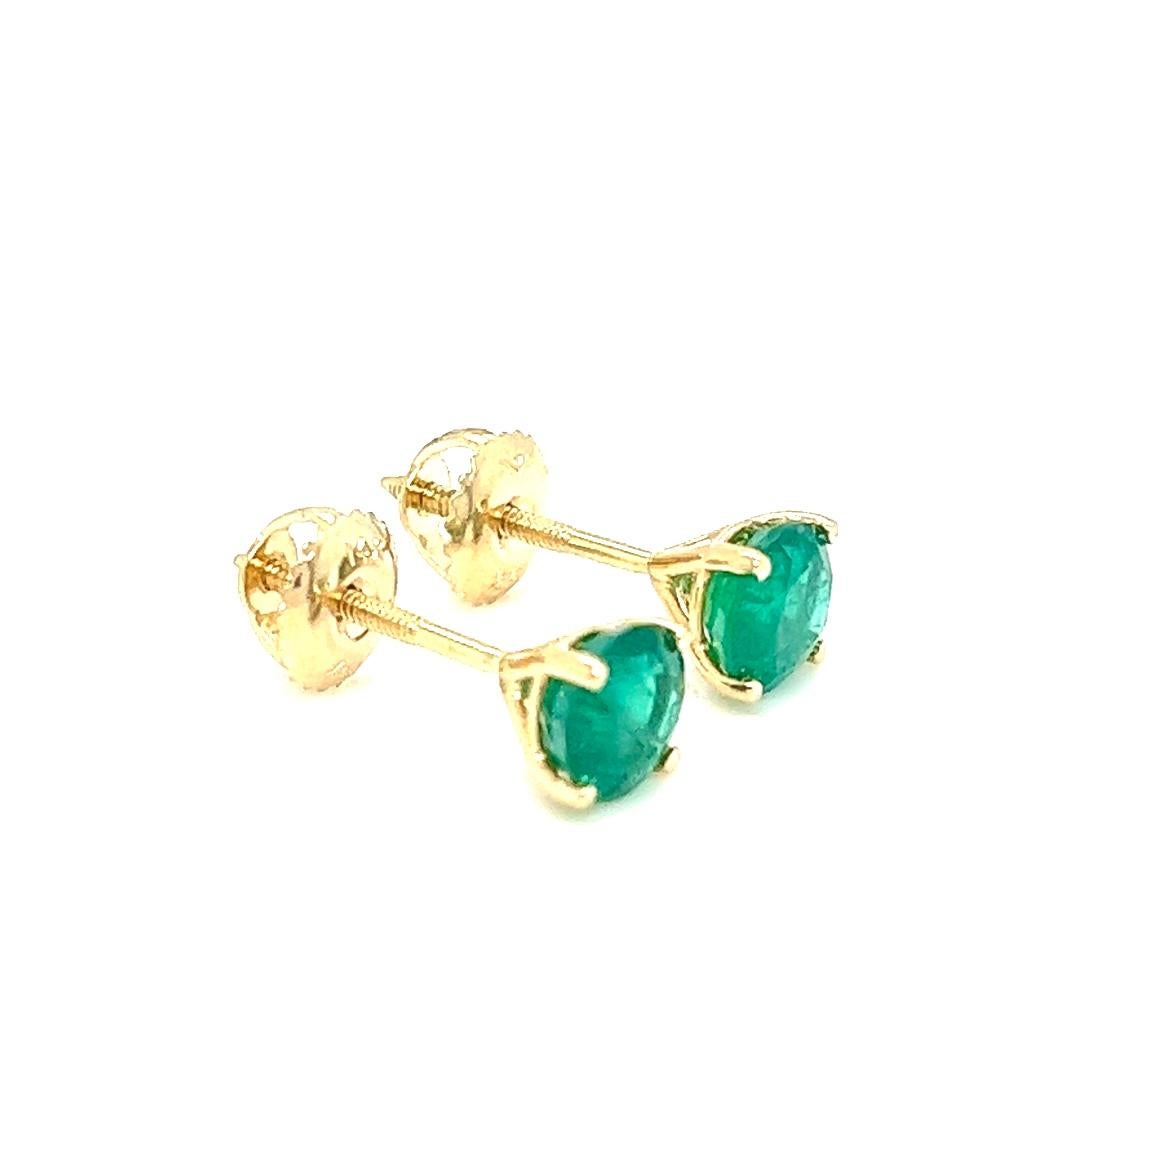 Women's or Men's 1.45 carats round Emerald Stud Earrings in 14K Yellow Gold. For Sale